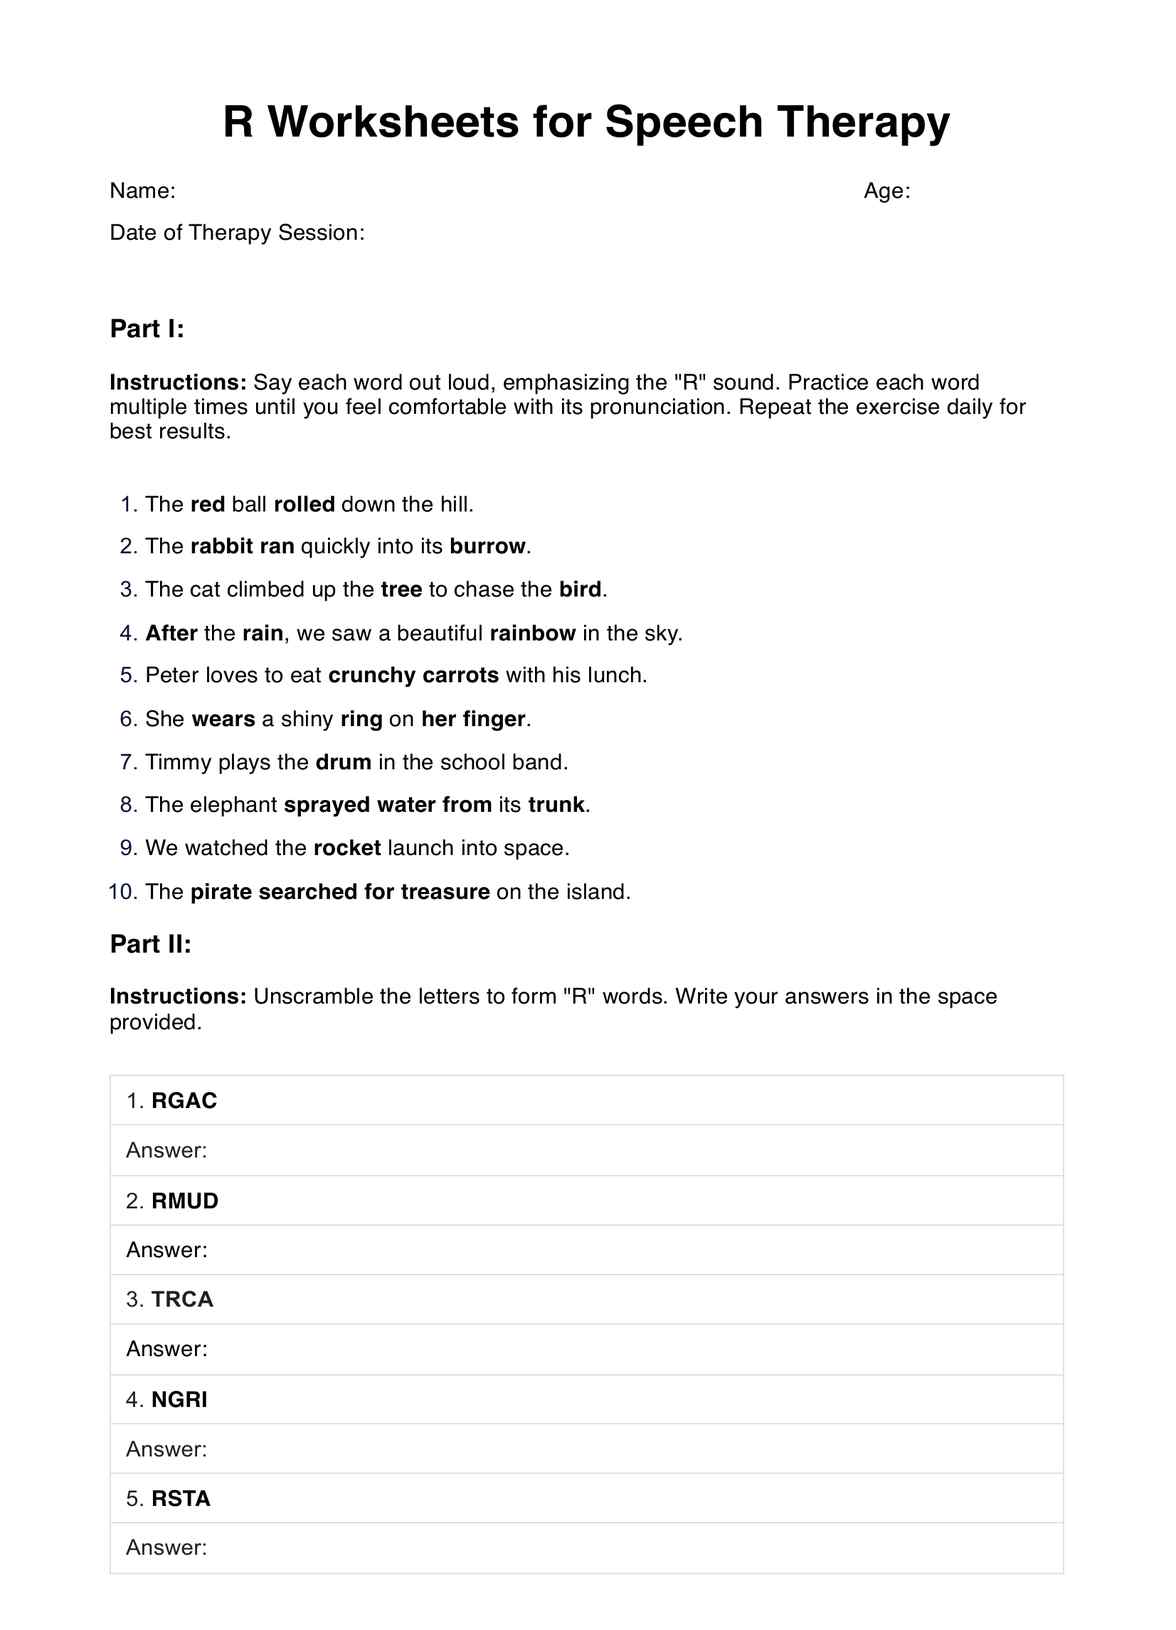 R Worksheets for Speech Therapy PDF Example